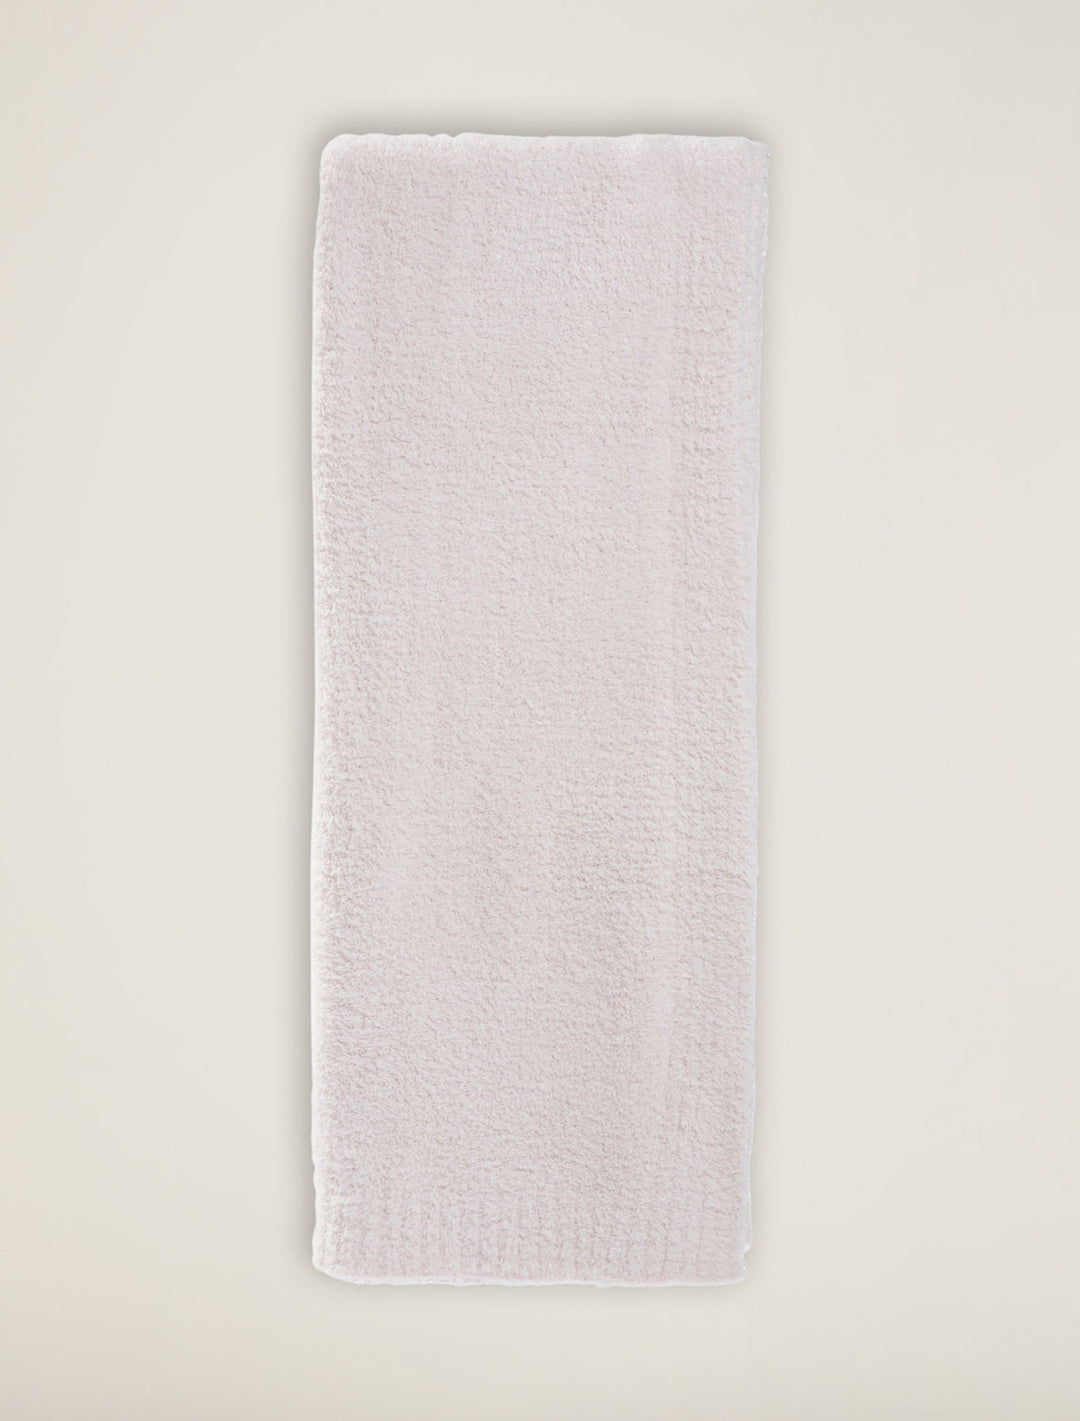 COZYCHIC THROW-PINK - Kingfisher Road - Online Boutique